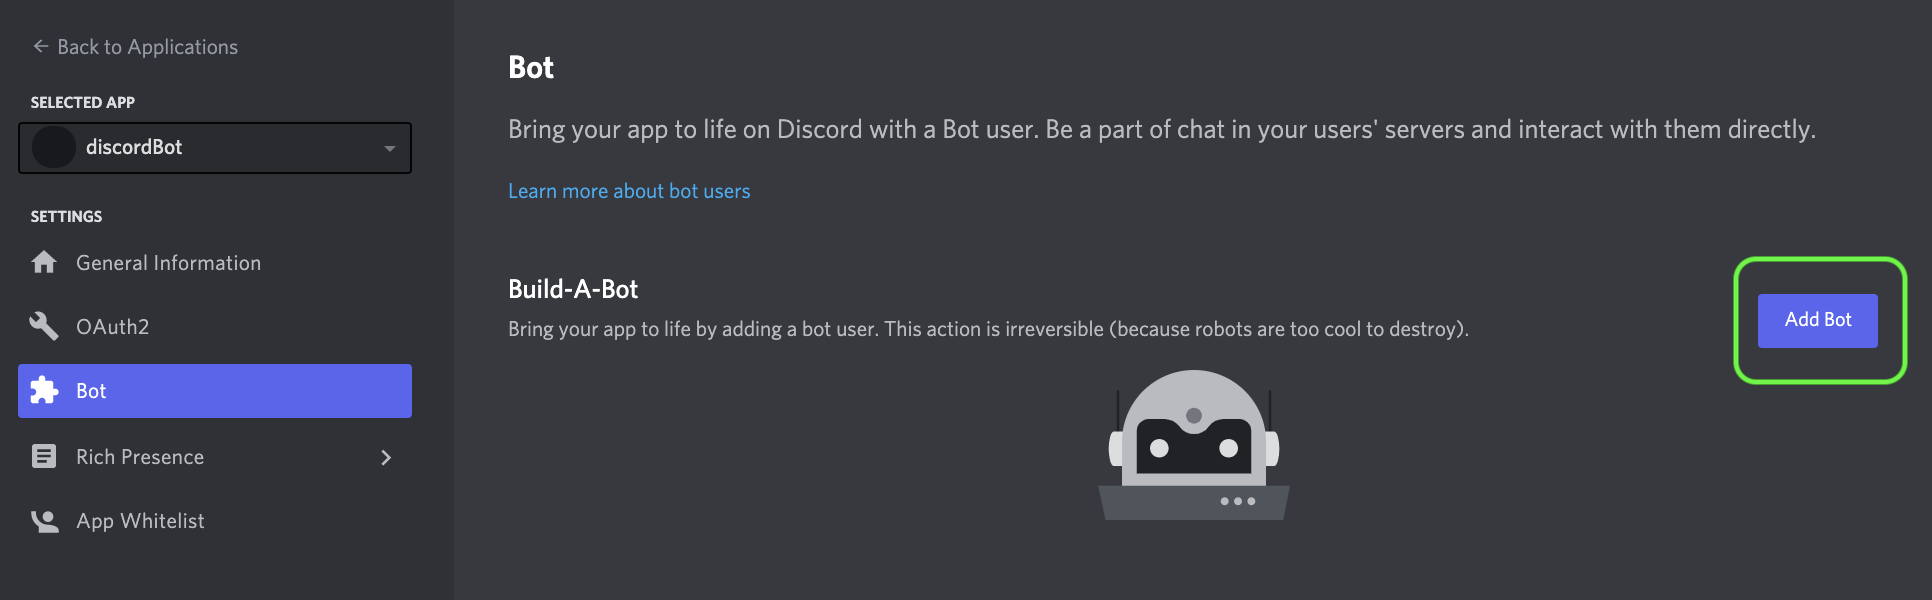 Application’s bot page with an add bot button